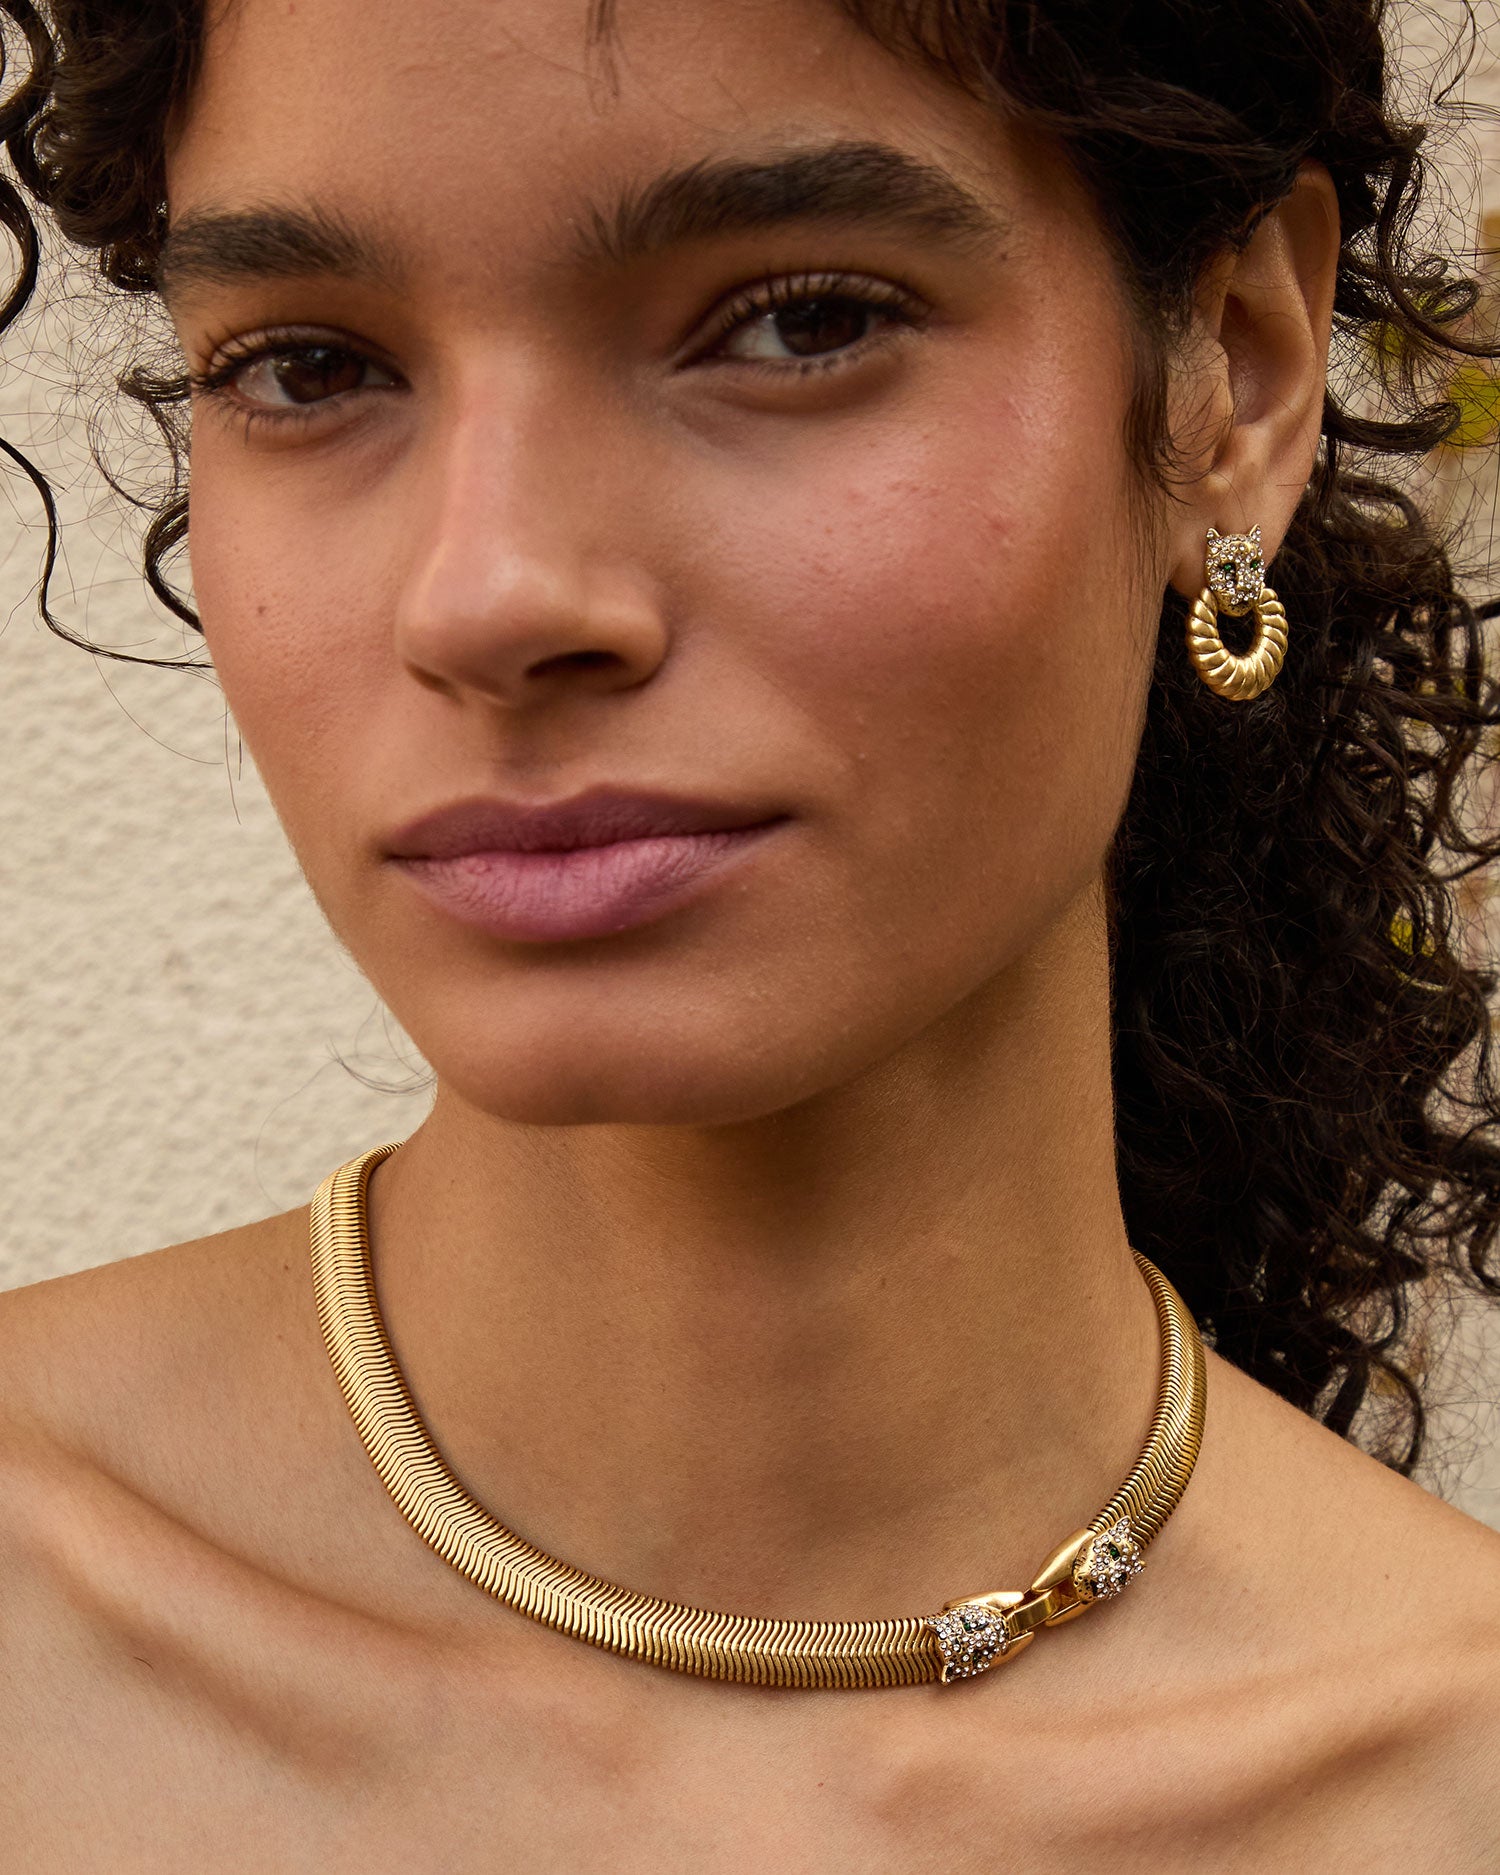 Haro wearing thre Vintage Gold Snake Chain Collar with the doorknocker earrings